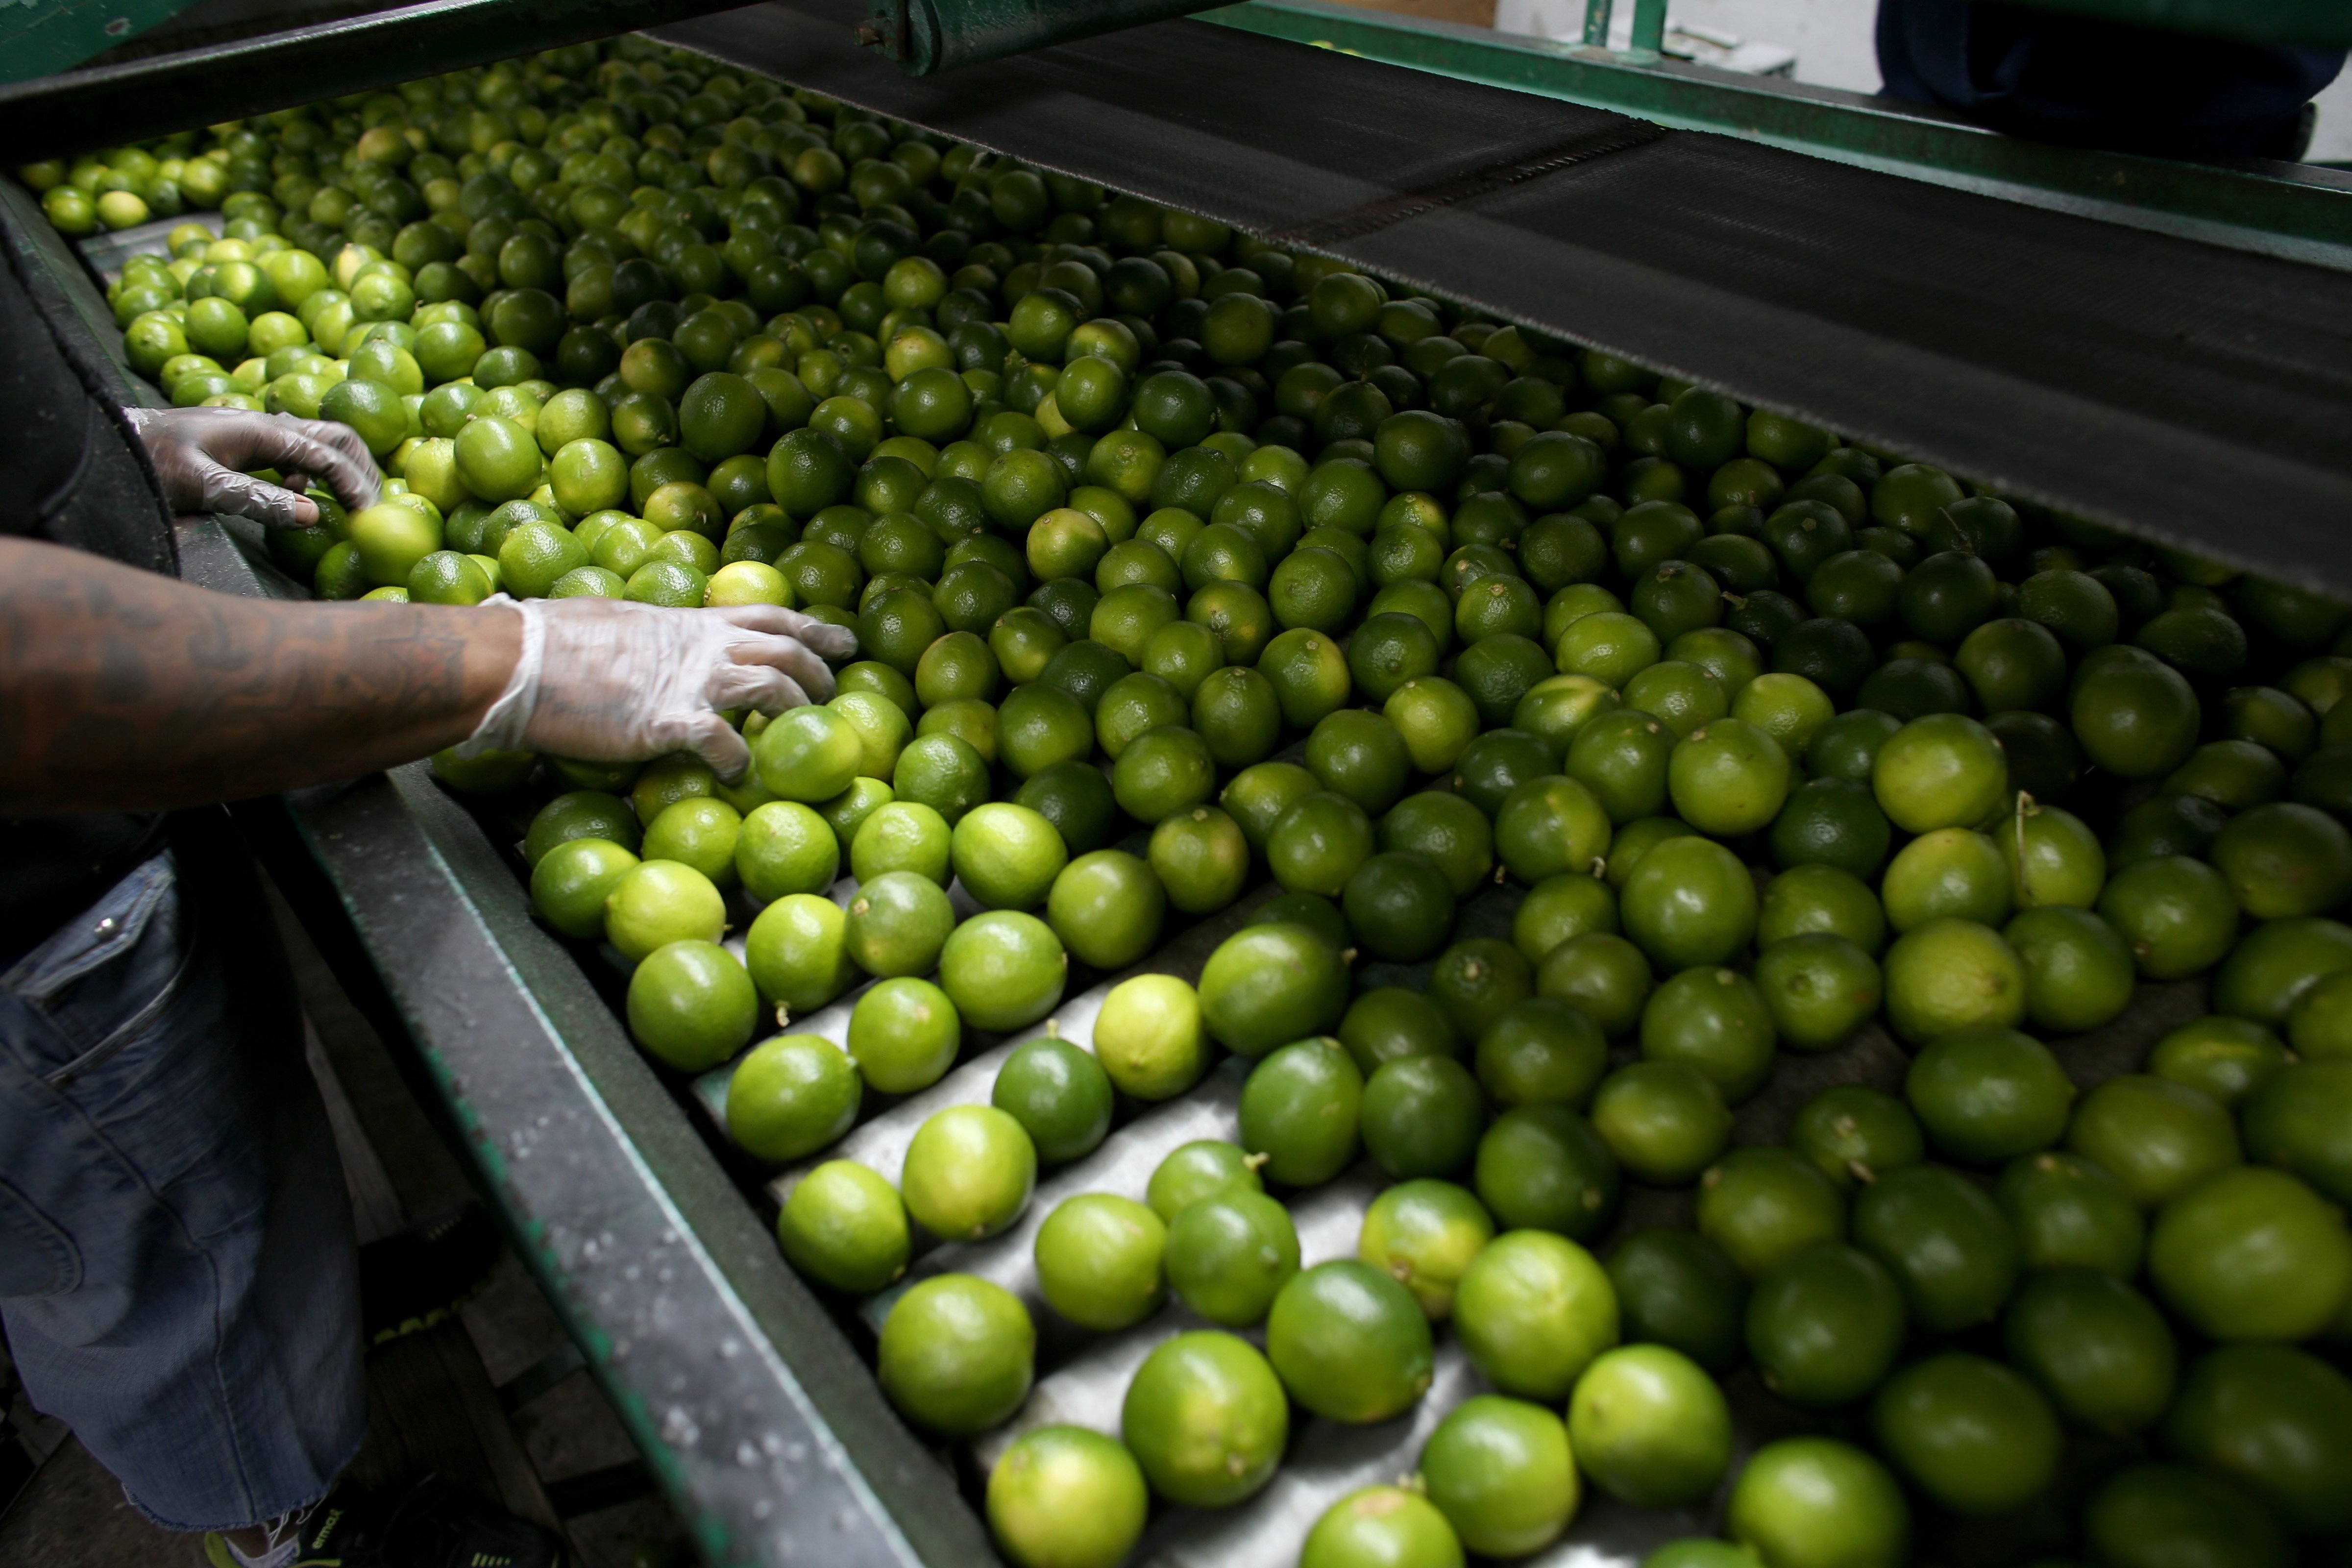 Dairoby Aldana sorts limes that have been imported from Columbia at SA Mex produce on March 26, 2014 in Miami.